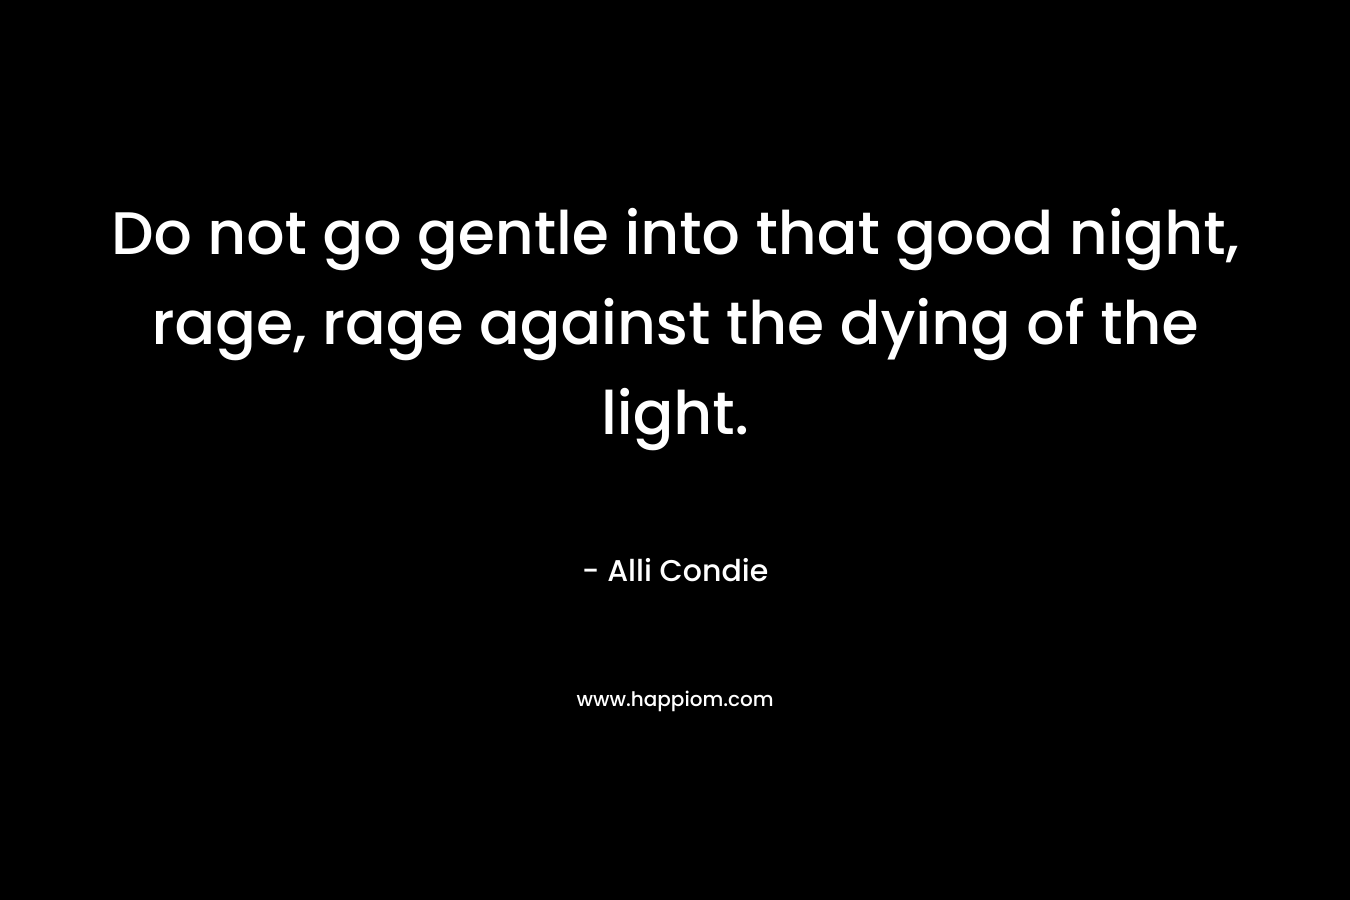 Do not go gentle into that good night, rage, rage against the dying of the light. – Alli Condie